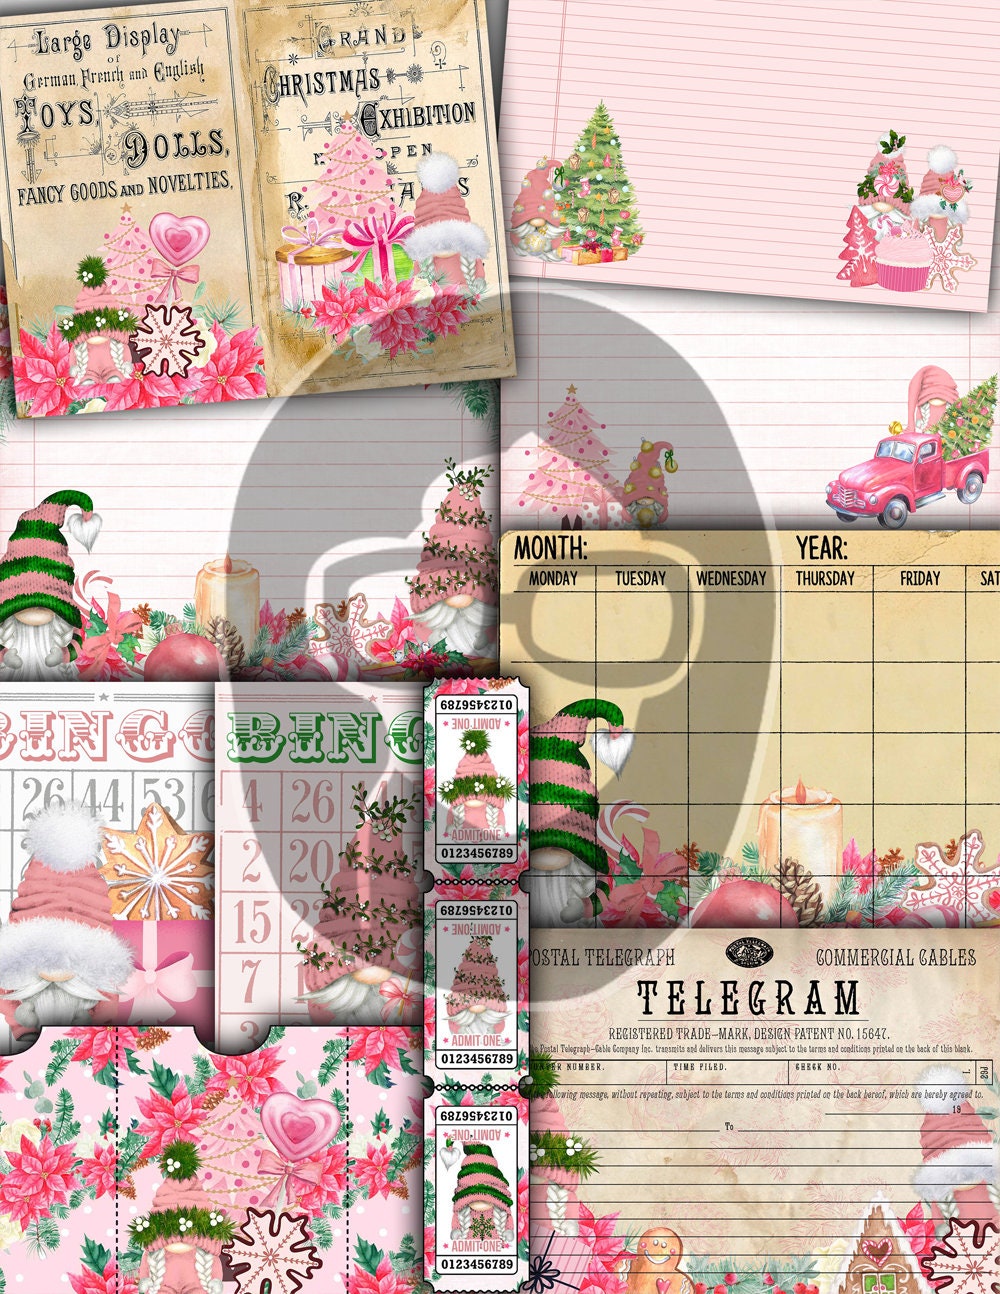 Gnome Junk Journal Kit, Pink Christmas Gnome -40pg Digital Download- Gnome For the Holidays, Printable Tags, Journaling Pages, Word Labels